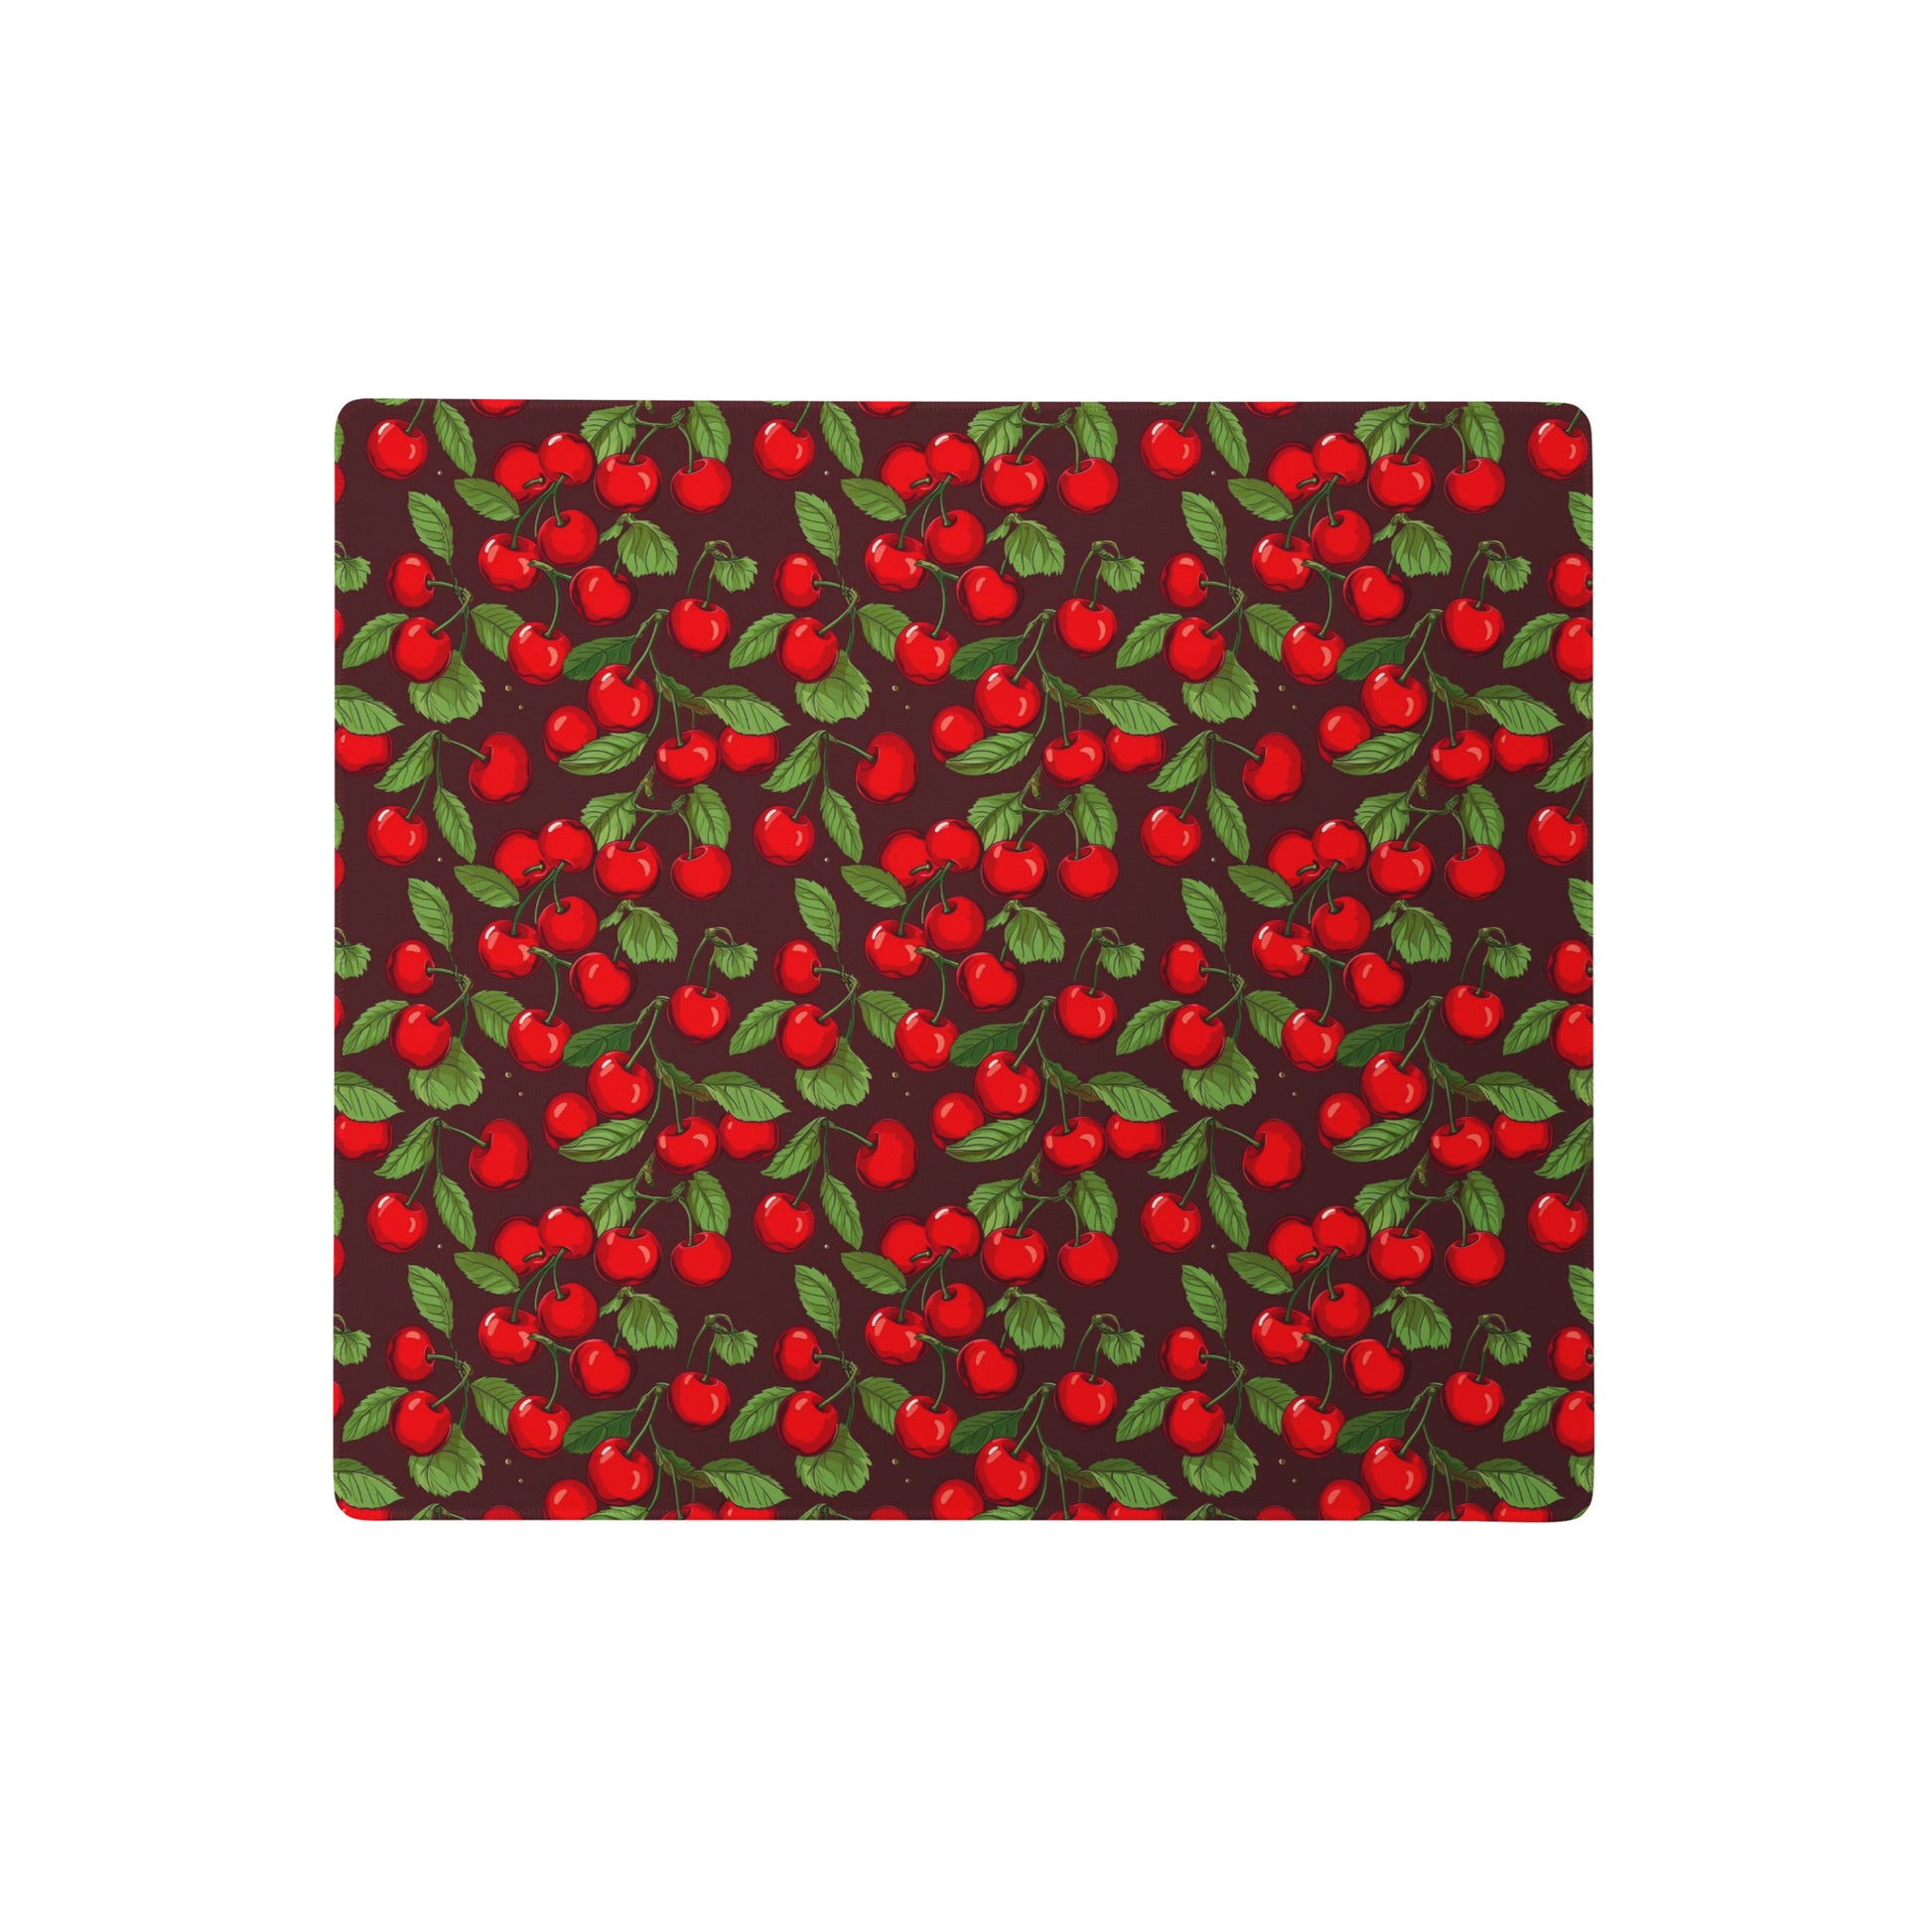 A 18" x 16" desk pad with cherries all over it. Red in color.